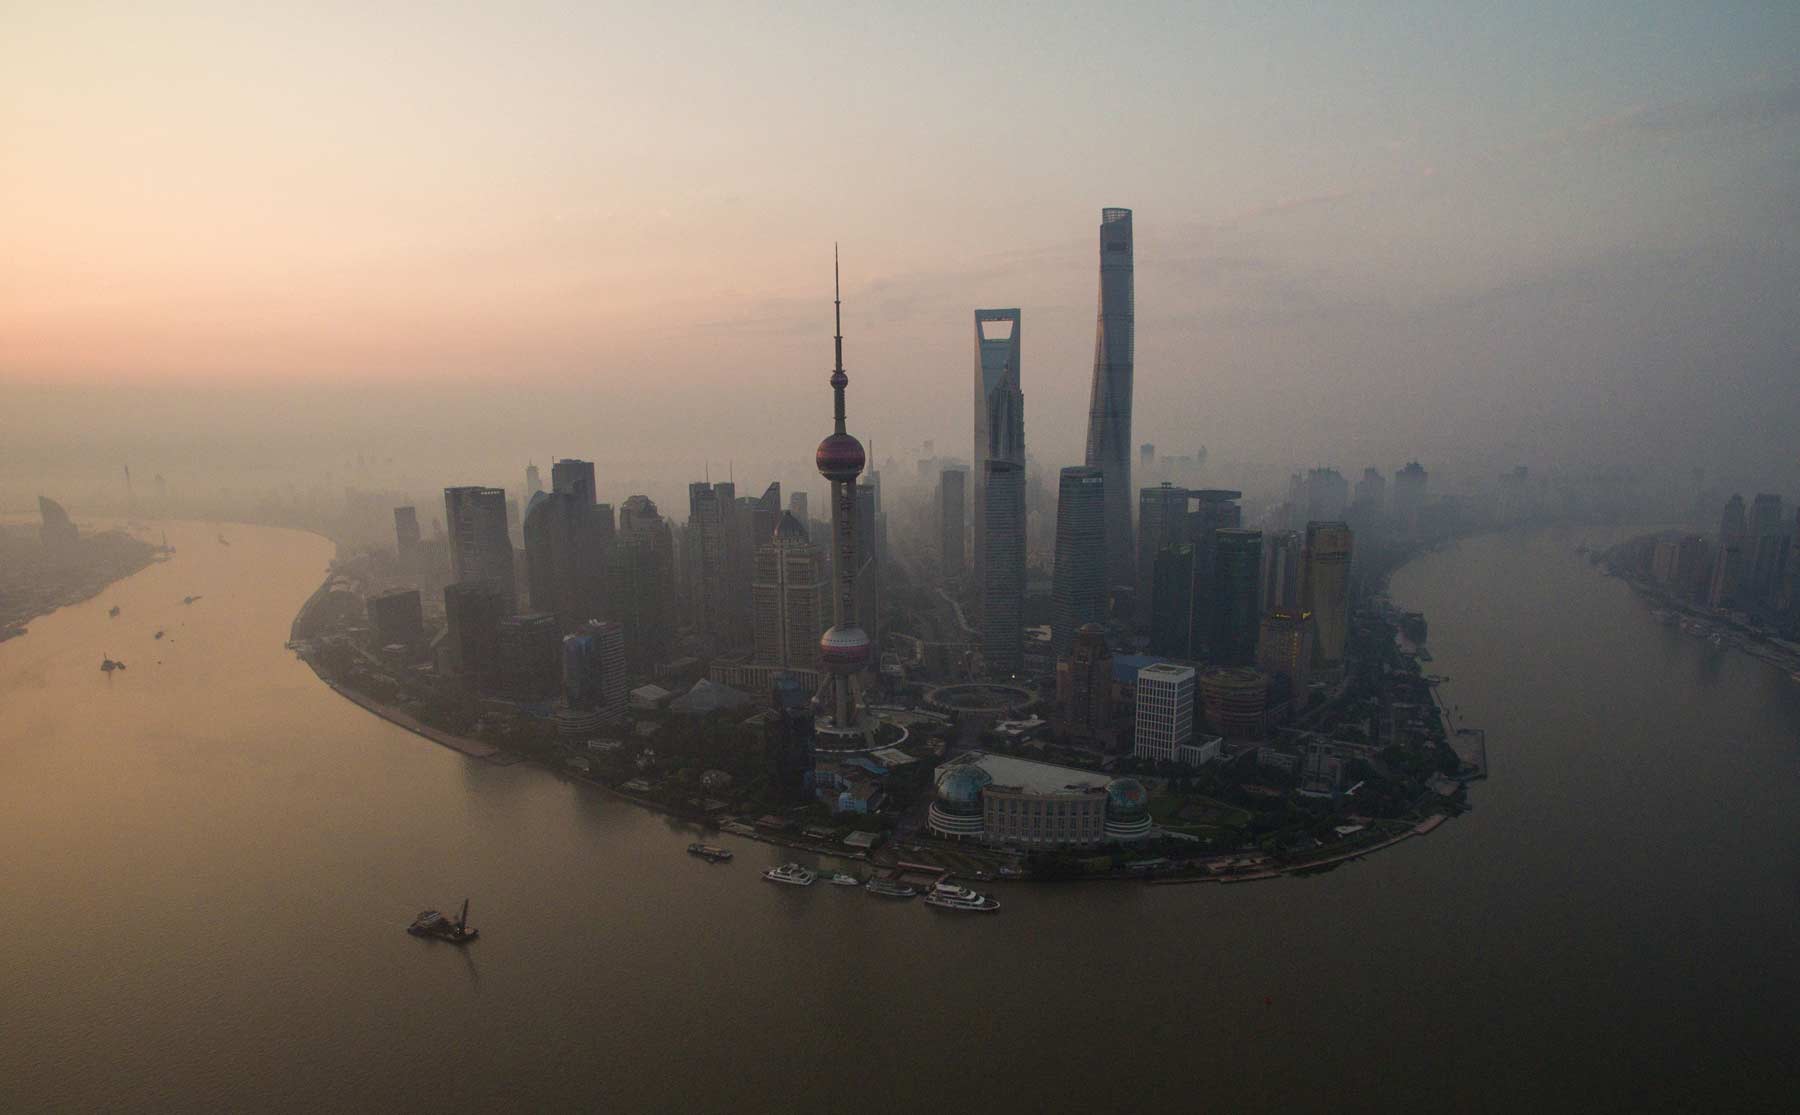 A general view shows the financial district of Lujiazui in Shanghai early on June 23, 2016. (Johannes Eisele/AFP/Getty Images)